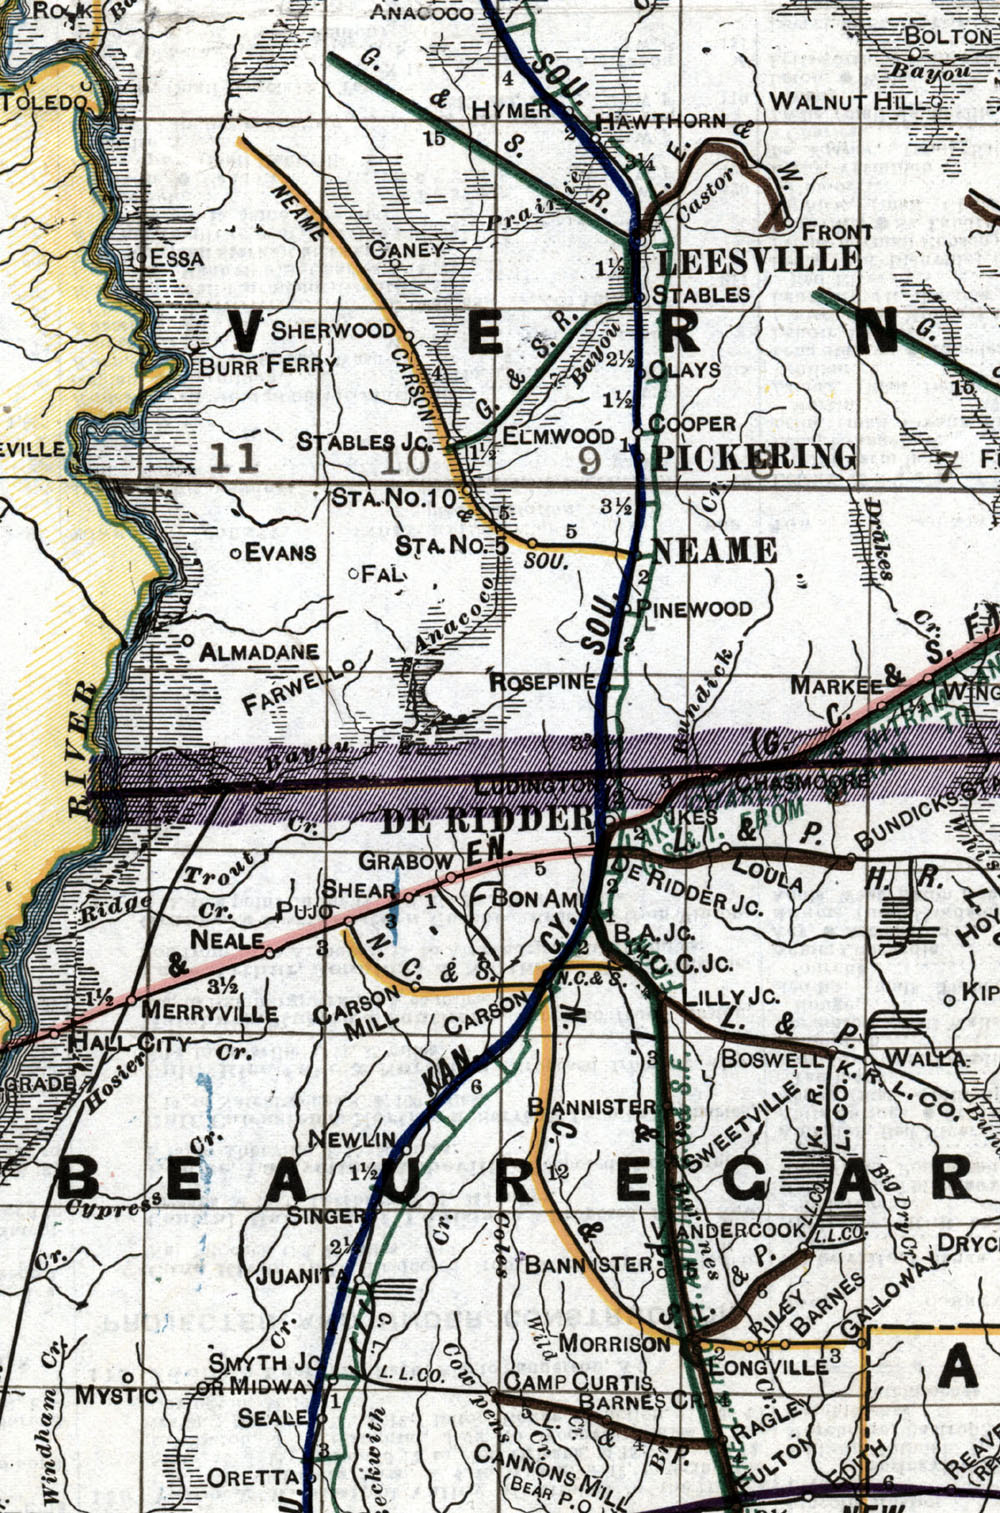 Neame, Carson & Southern Railway Company (La.), Map Showing Route in 1920.